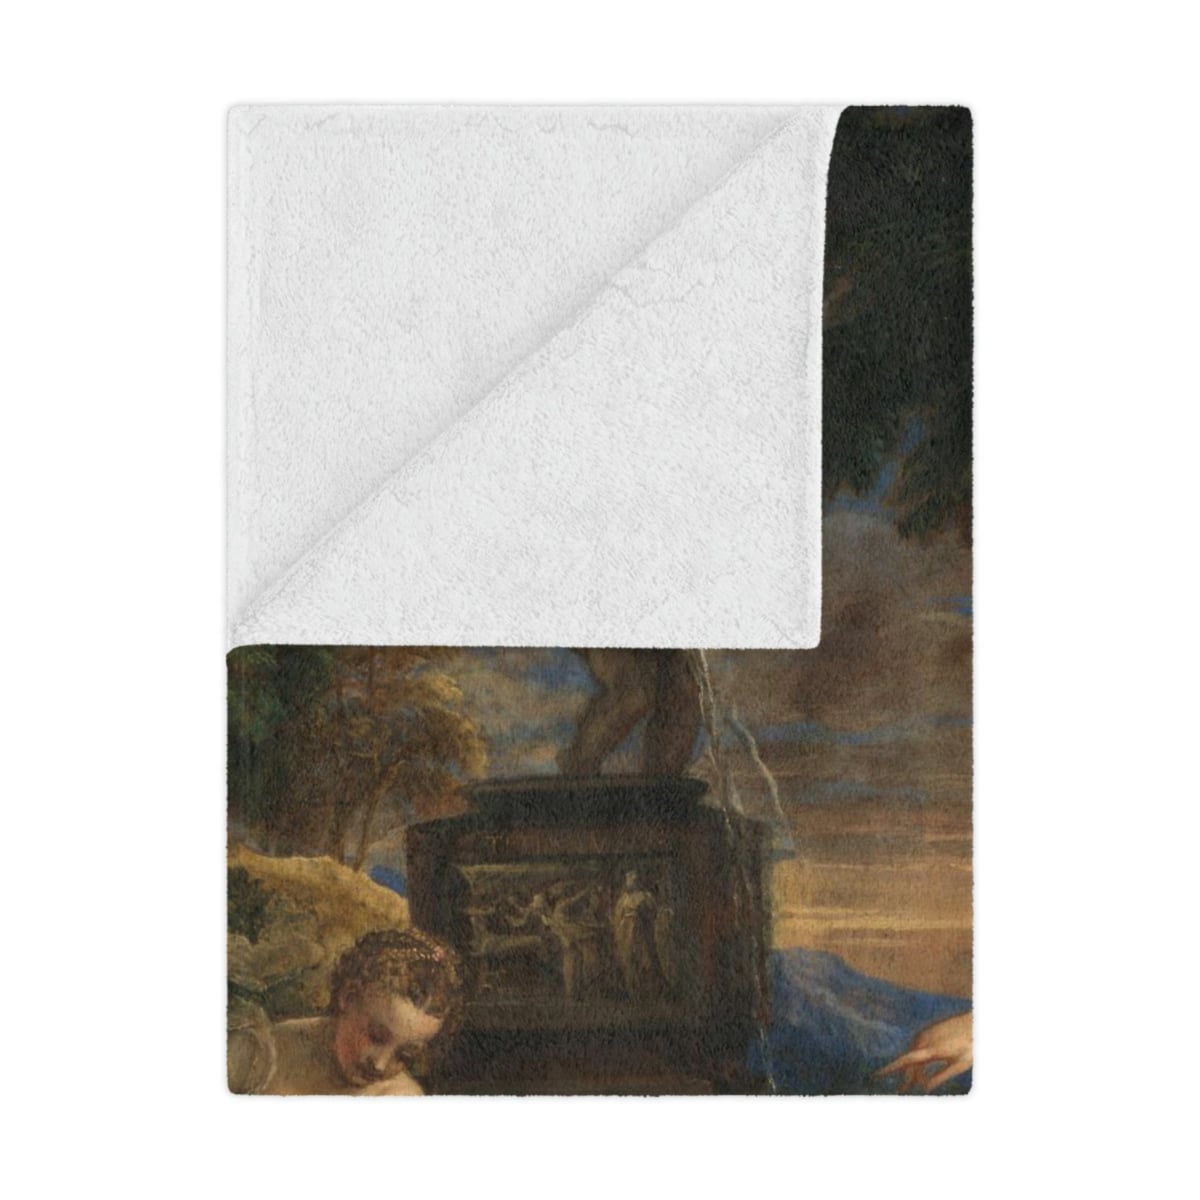 Titian’s Diana and Callisto Art Blanket - Classic Elegance for Home